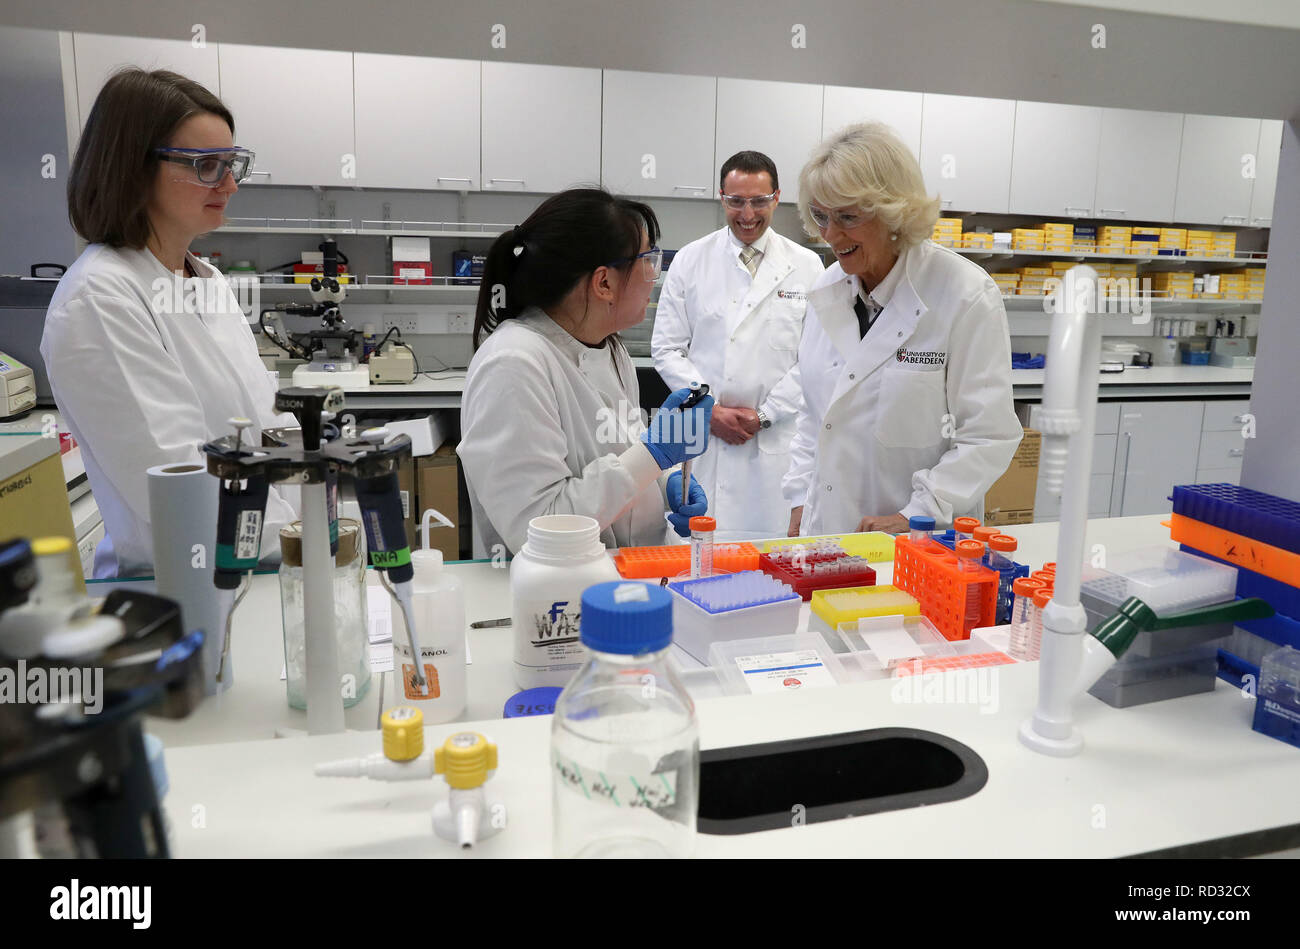 The Duchess of Cornwall, known as the Duchess of Rothesay chats with l-r Alison Richmond and Jessica McClure alongside Professor Cosimo De Bari whilst visiting a research lab at the Centre for Arthritis and Musculoskeletal Health during a visit to Aberdeen University's School of Medicine, Medical Sciences and Nutrition. Stock Photo